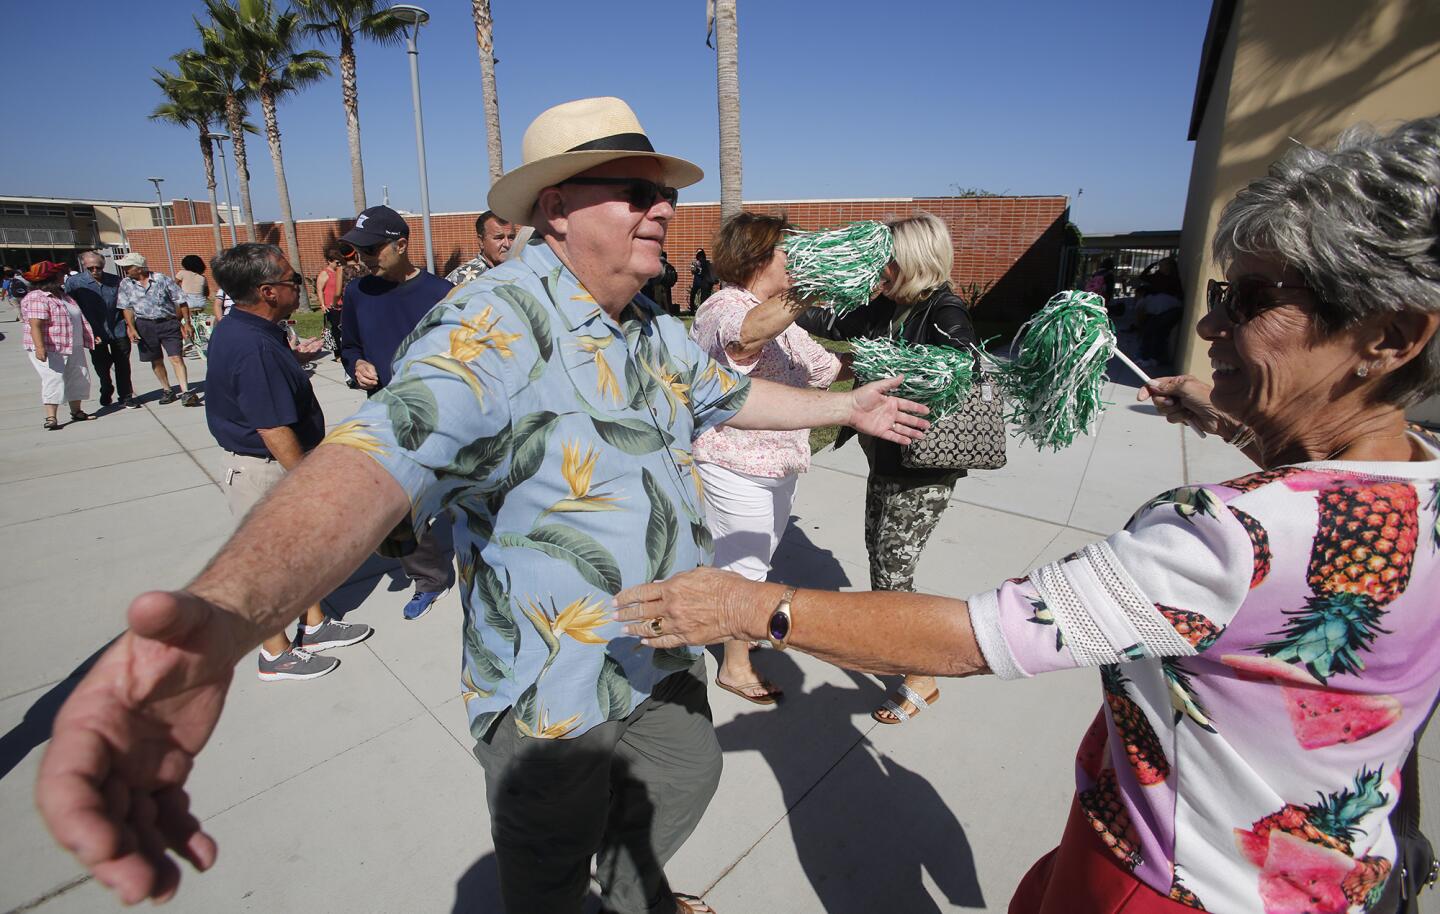 Rusty Lusk and Shirley Macy embrace after having not seen each other in years as members of the class of 1968 gather at Costa Mesa High School on Friday before their 50th-anniversary reunion Saturday.